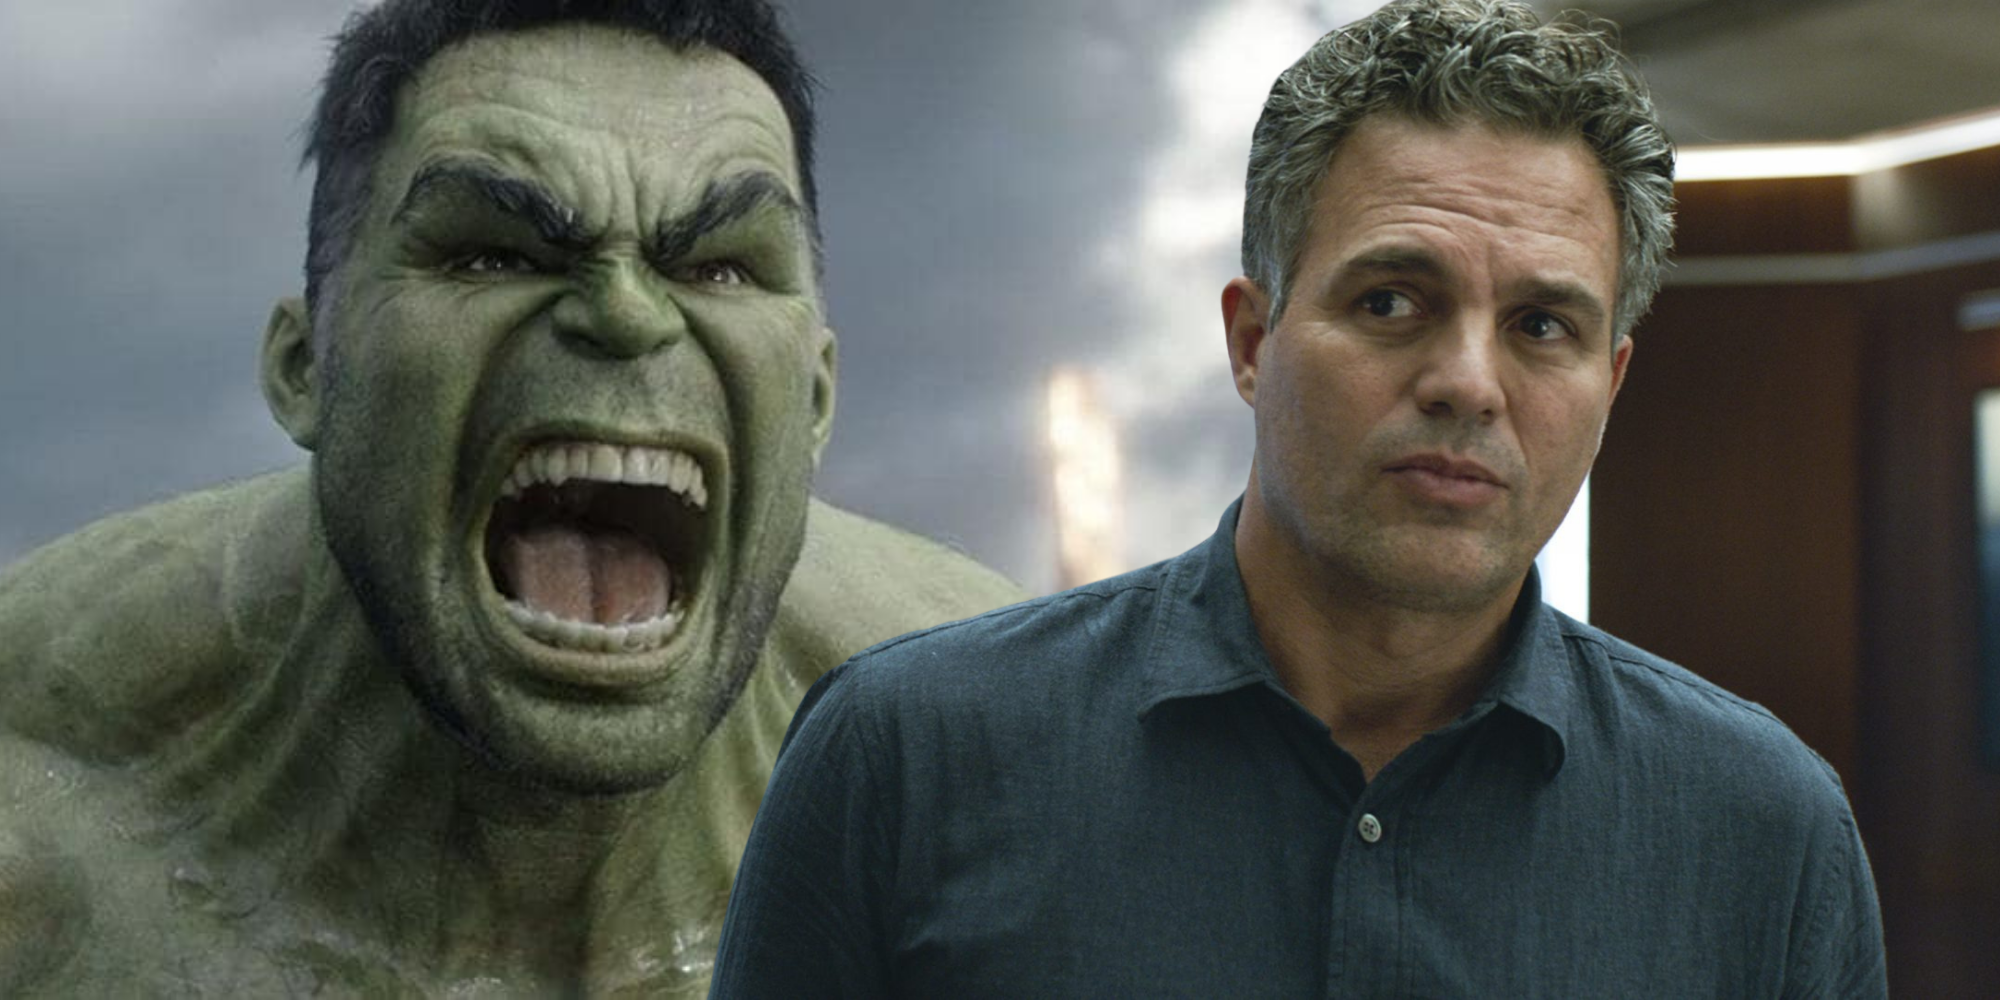 Bruce Banner and the Hulk